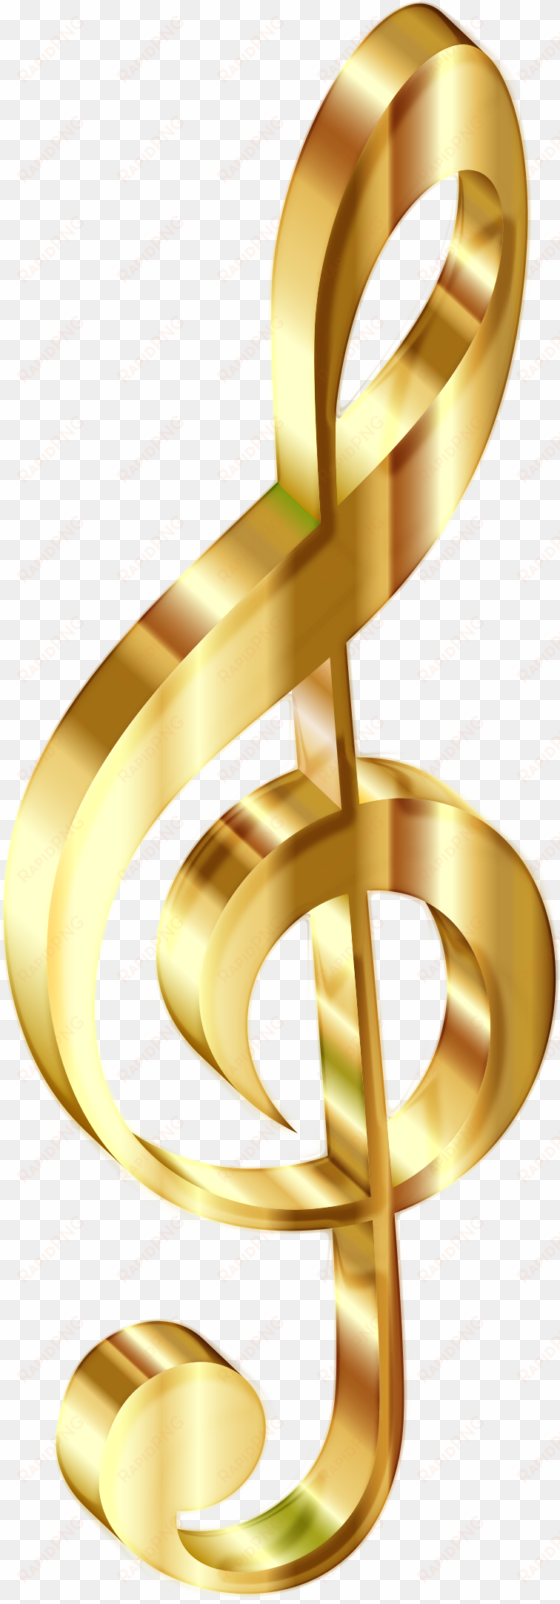 this free icons png design of gold 3d clef enhanced